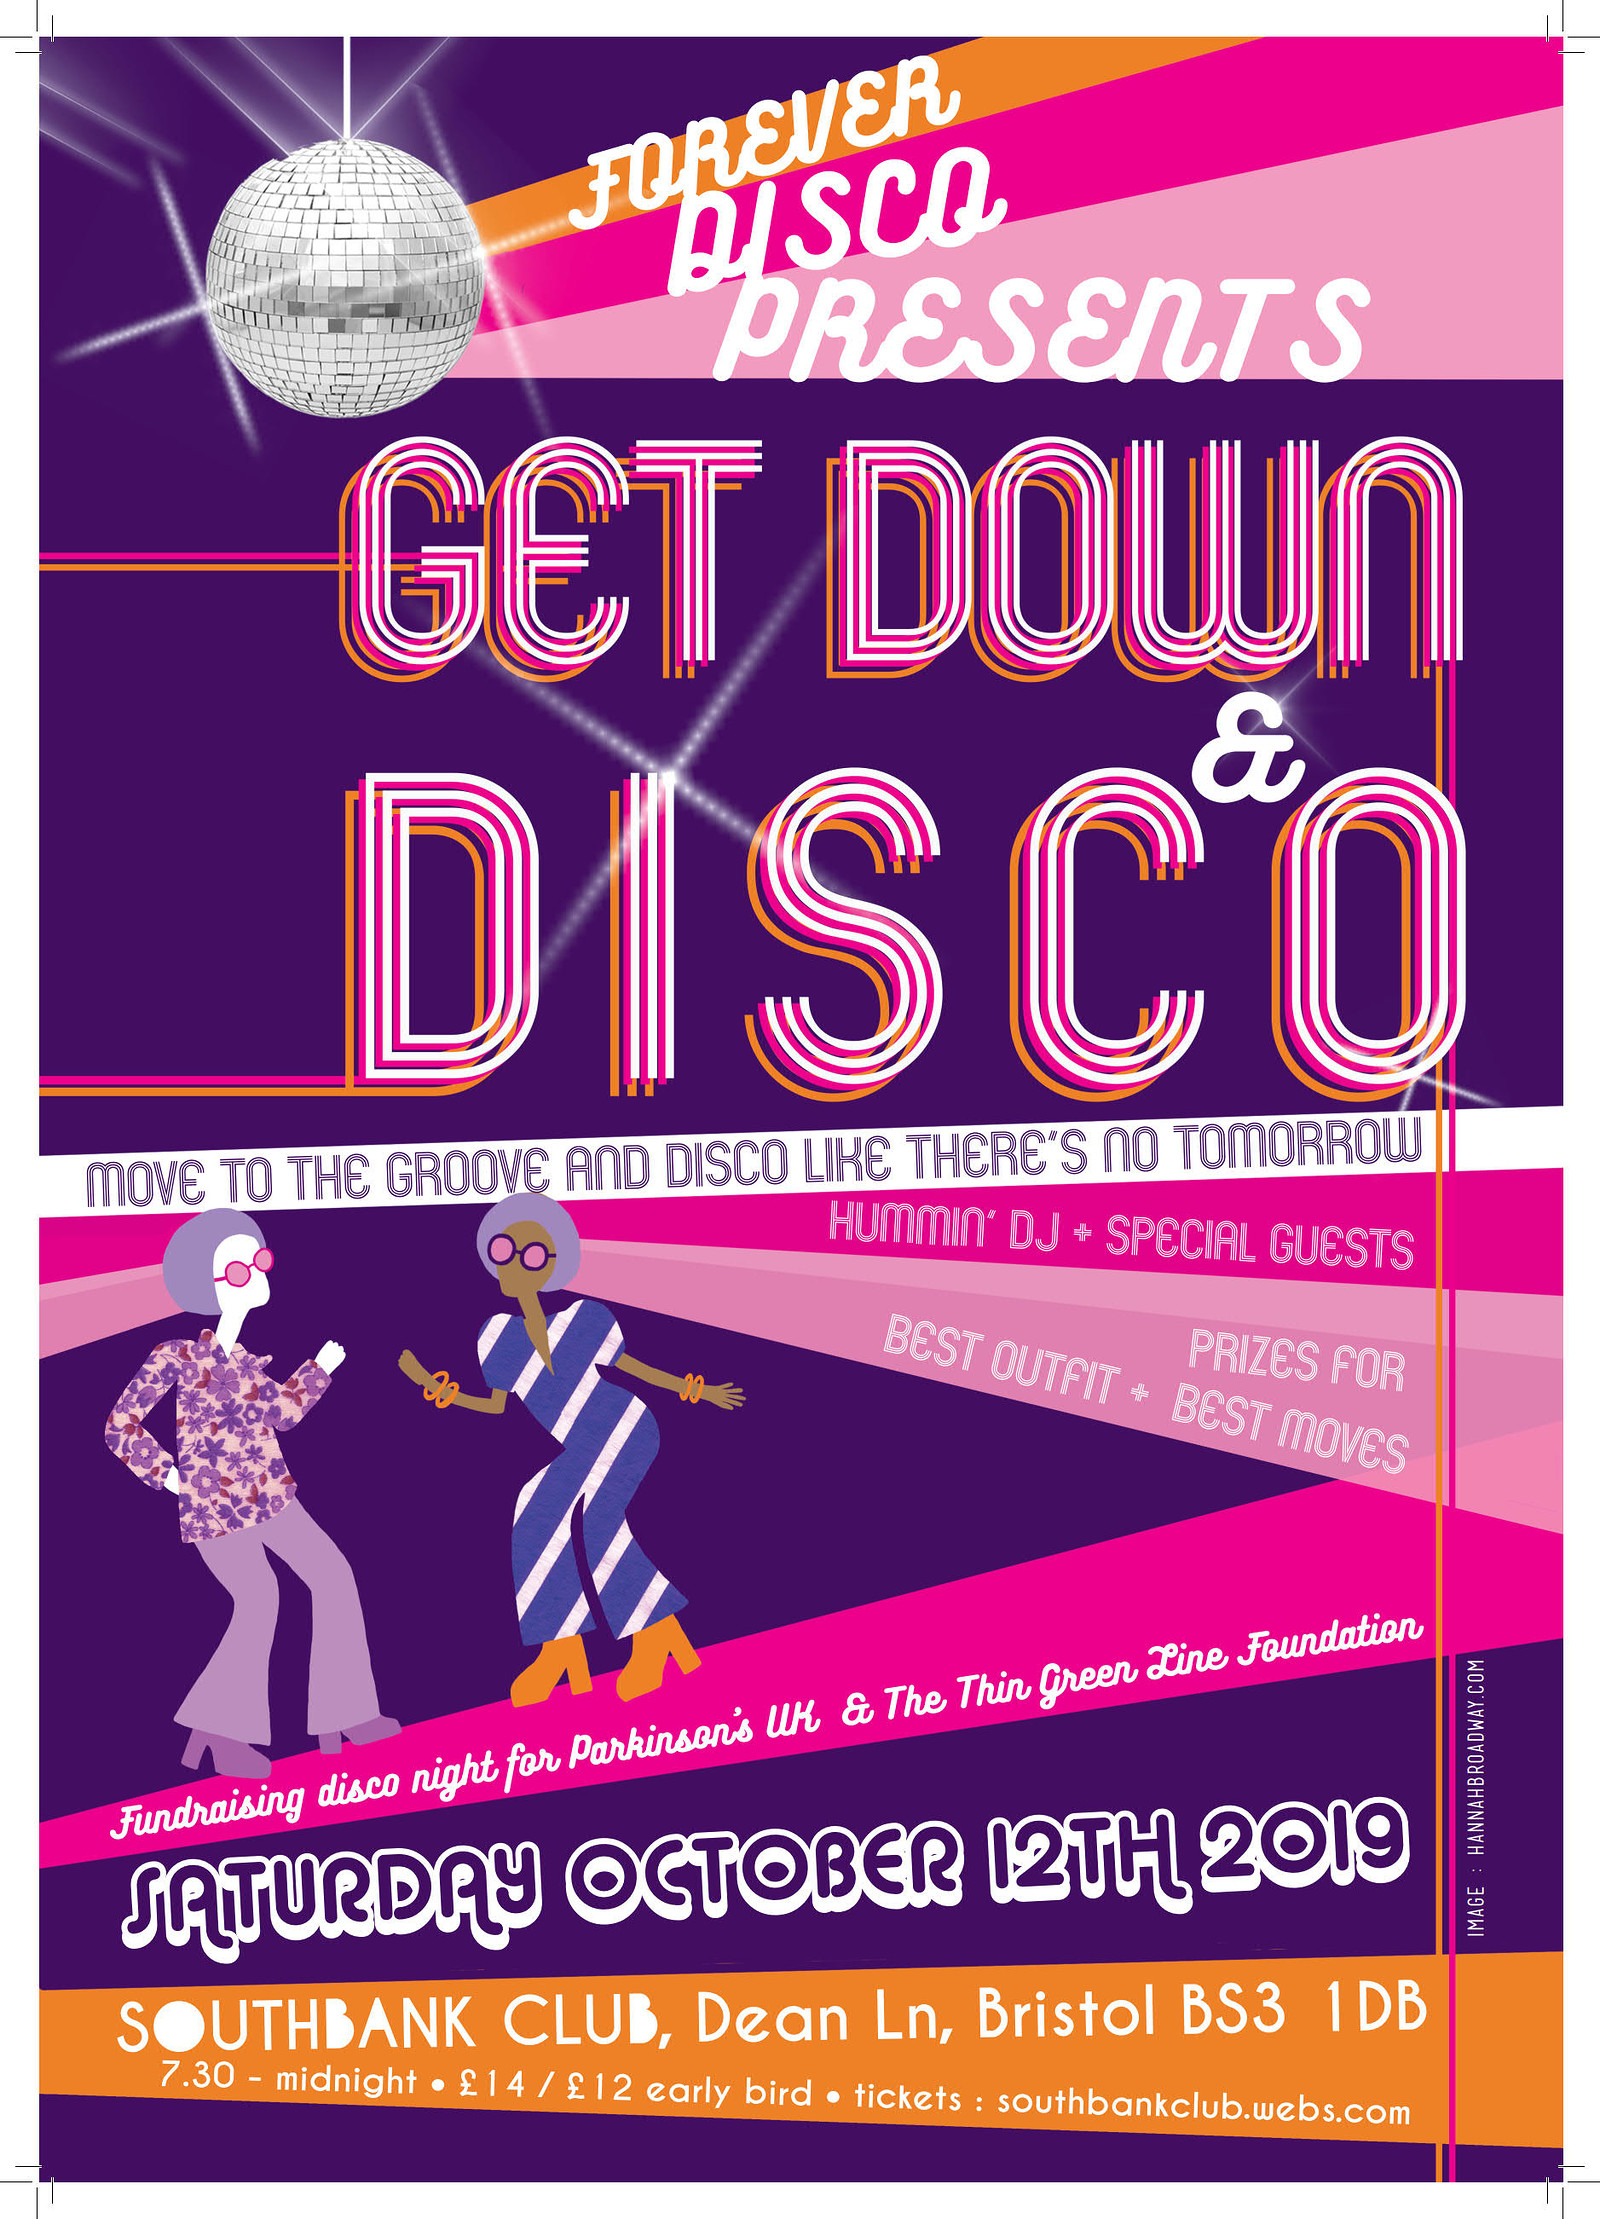 Get Down and Disco at SouthBank